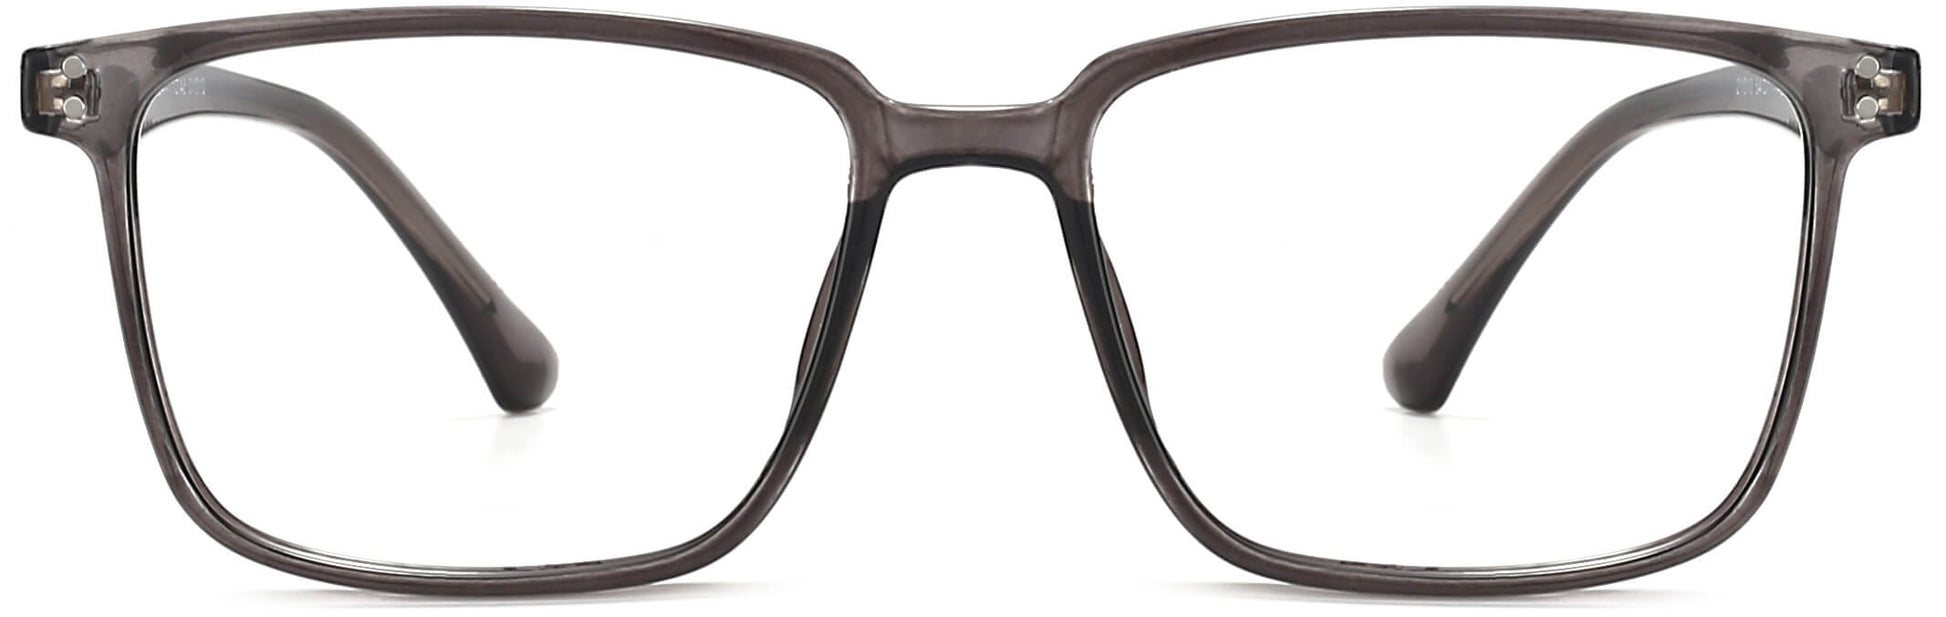 Tadeo Square Gray Eyeglasses from ANRRI, front view